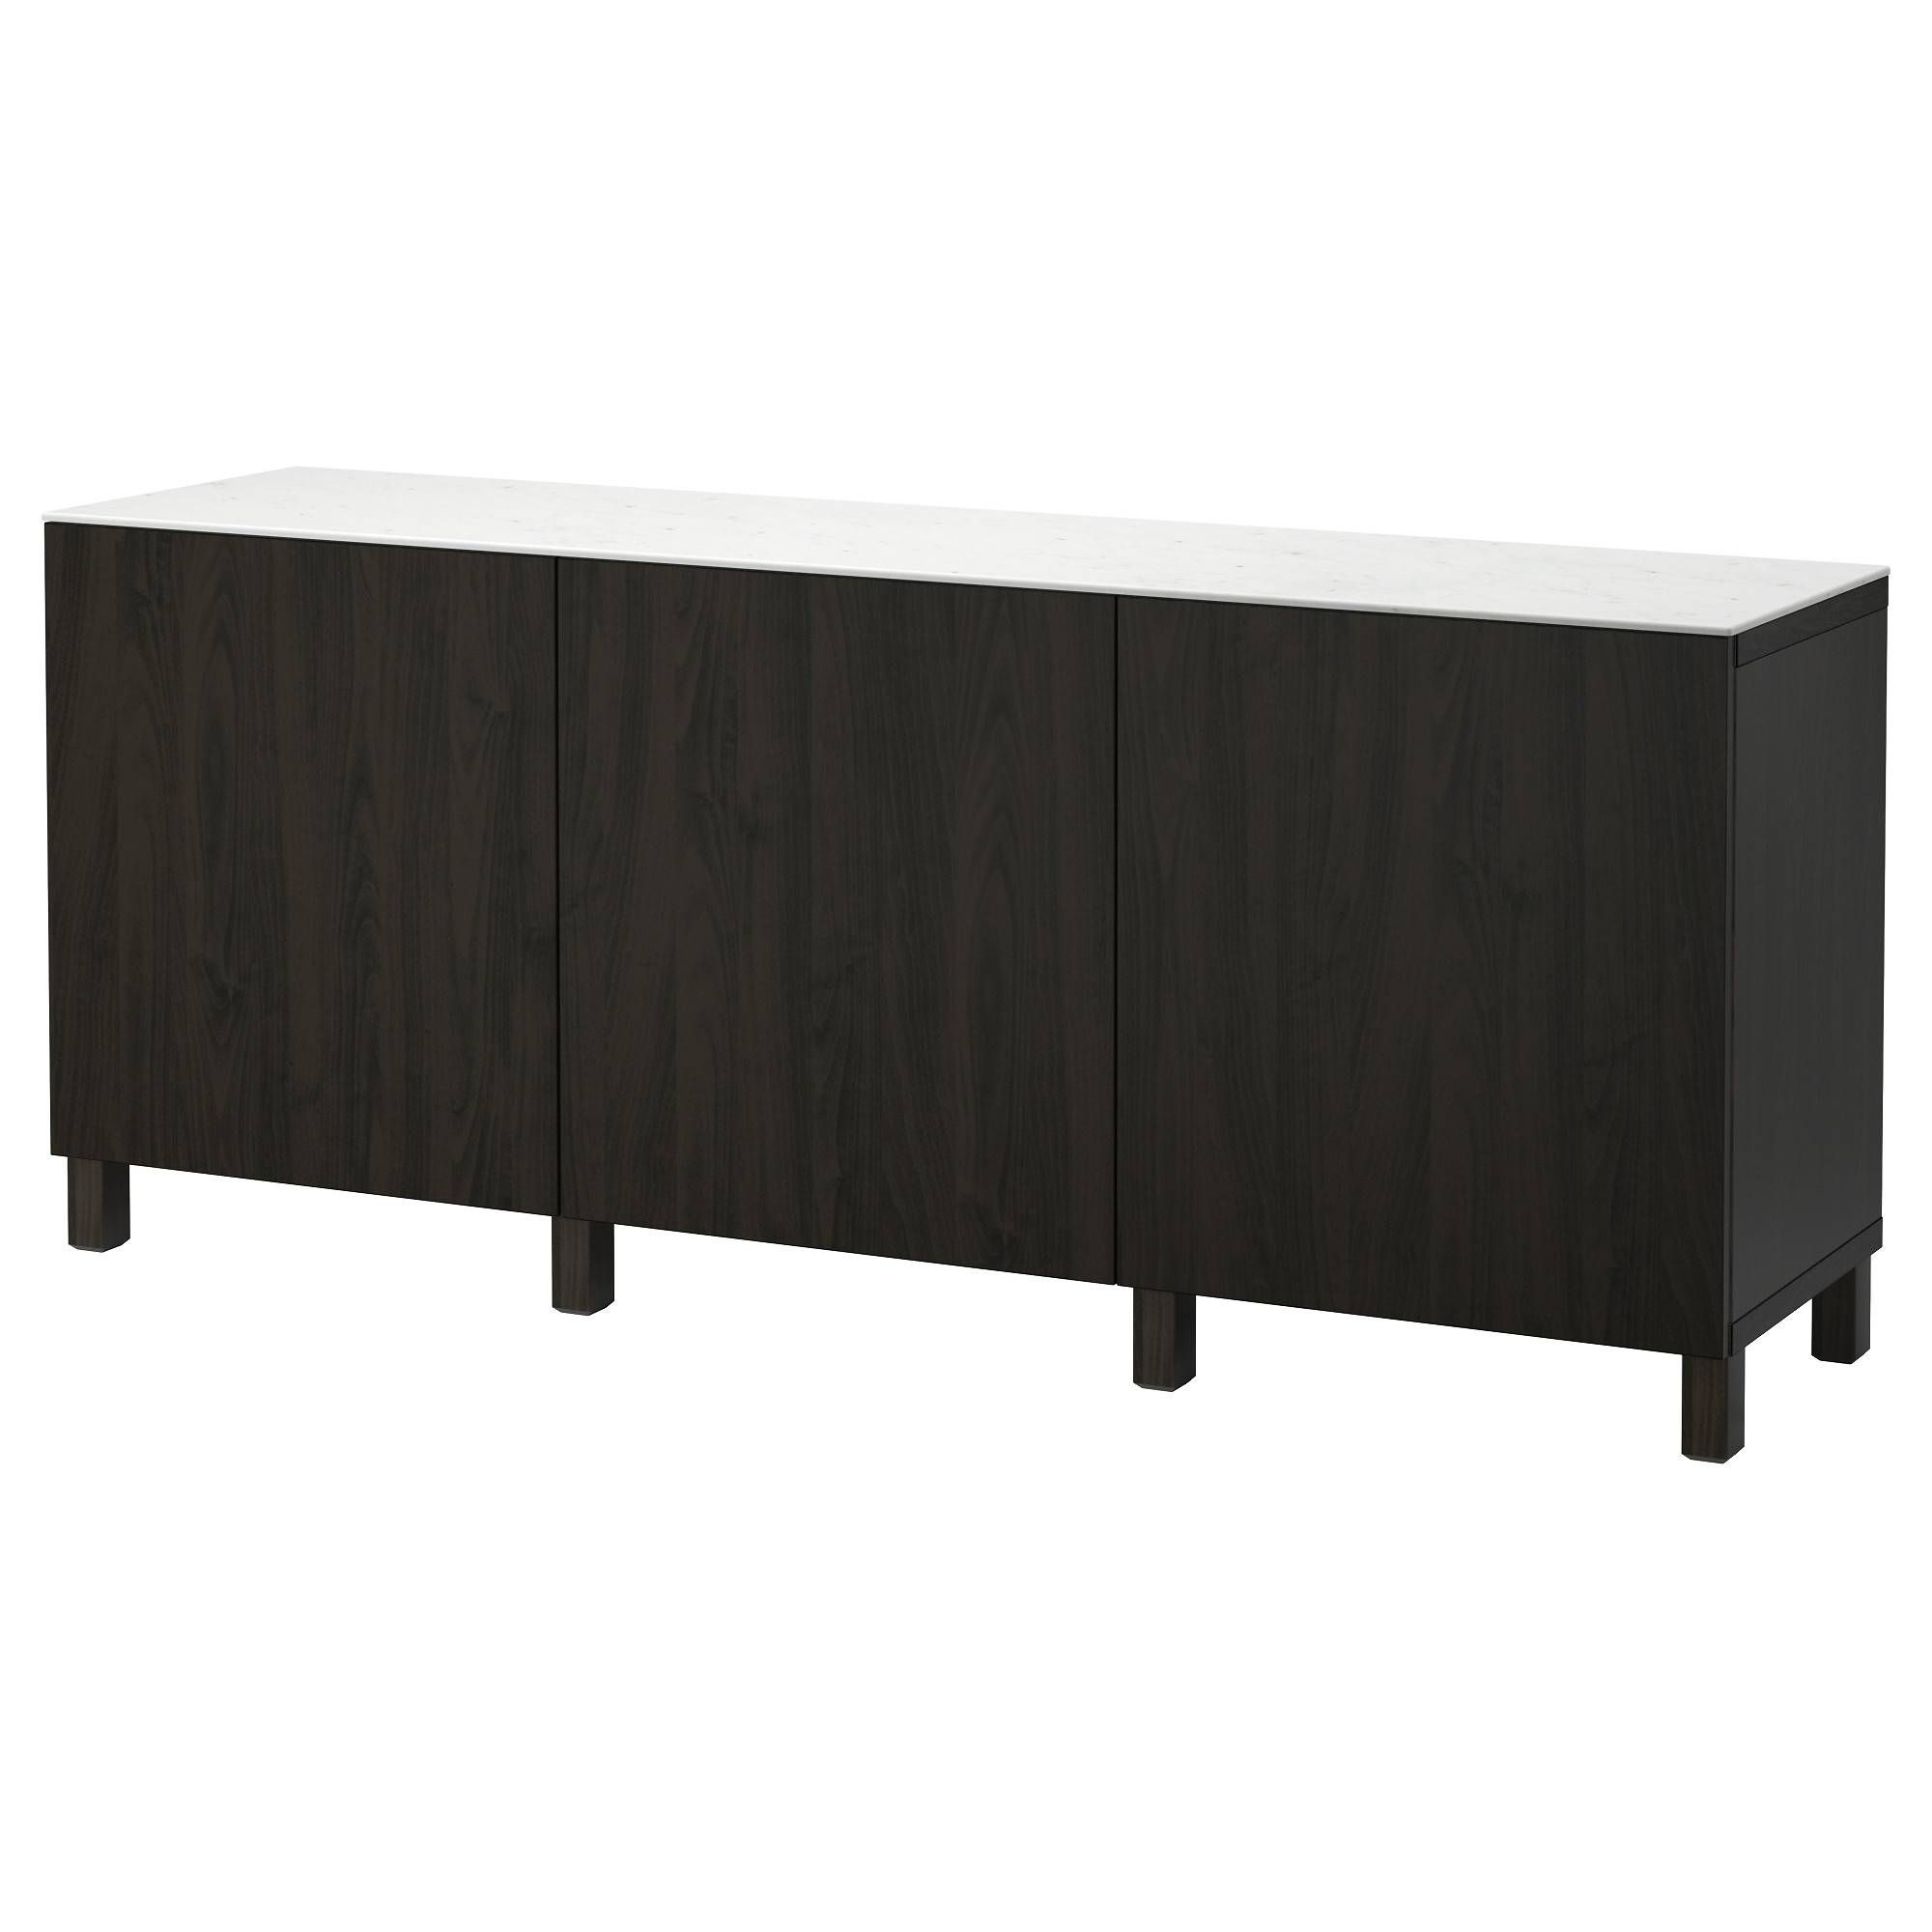 Buffet Tables & Sideboards – Ikea Intended For Scandinavian Buffets And Sideboards (View 11 of 15)